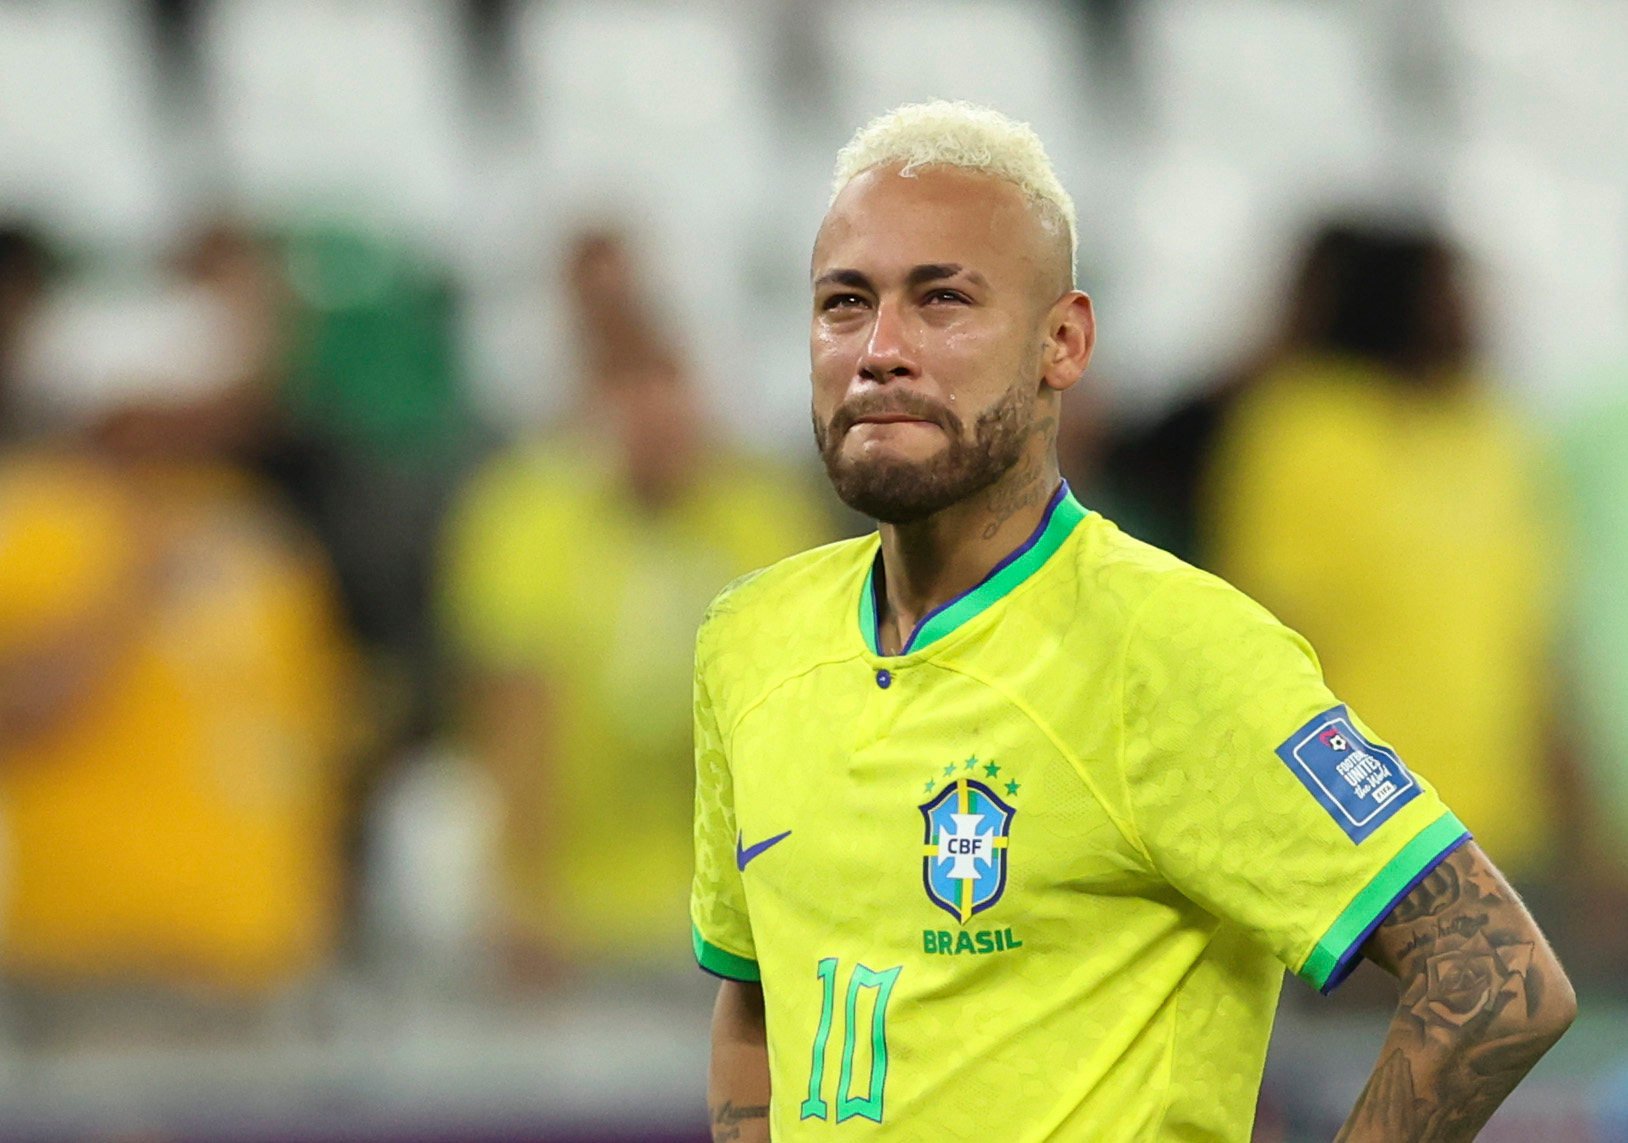 Fifa World Cup 2022: Neymar ties Pele's record but loses again, casts doubt  on his Brazil future